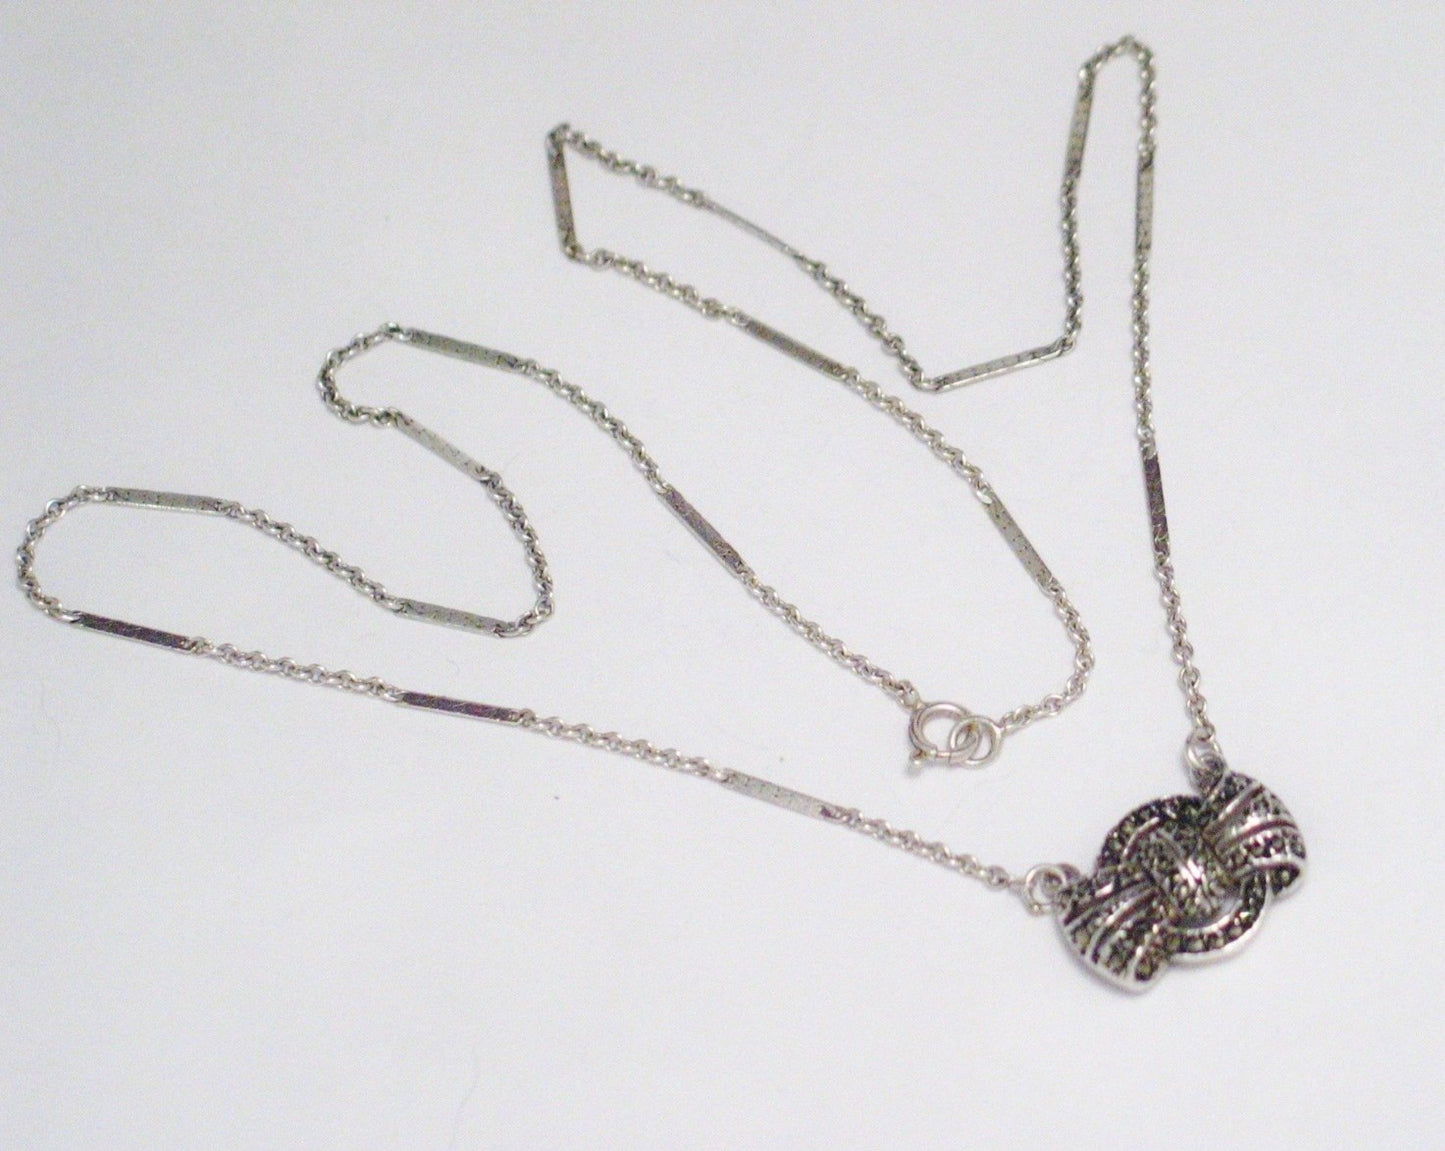 Womens Necklace | Vintage Sterling Silver Marcasite Bow Fancy Link Chain Necklace 17" | Estate Jewelry online at Blingschlingers